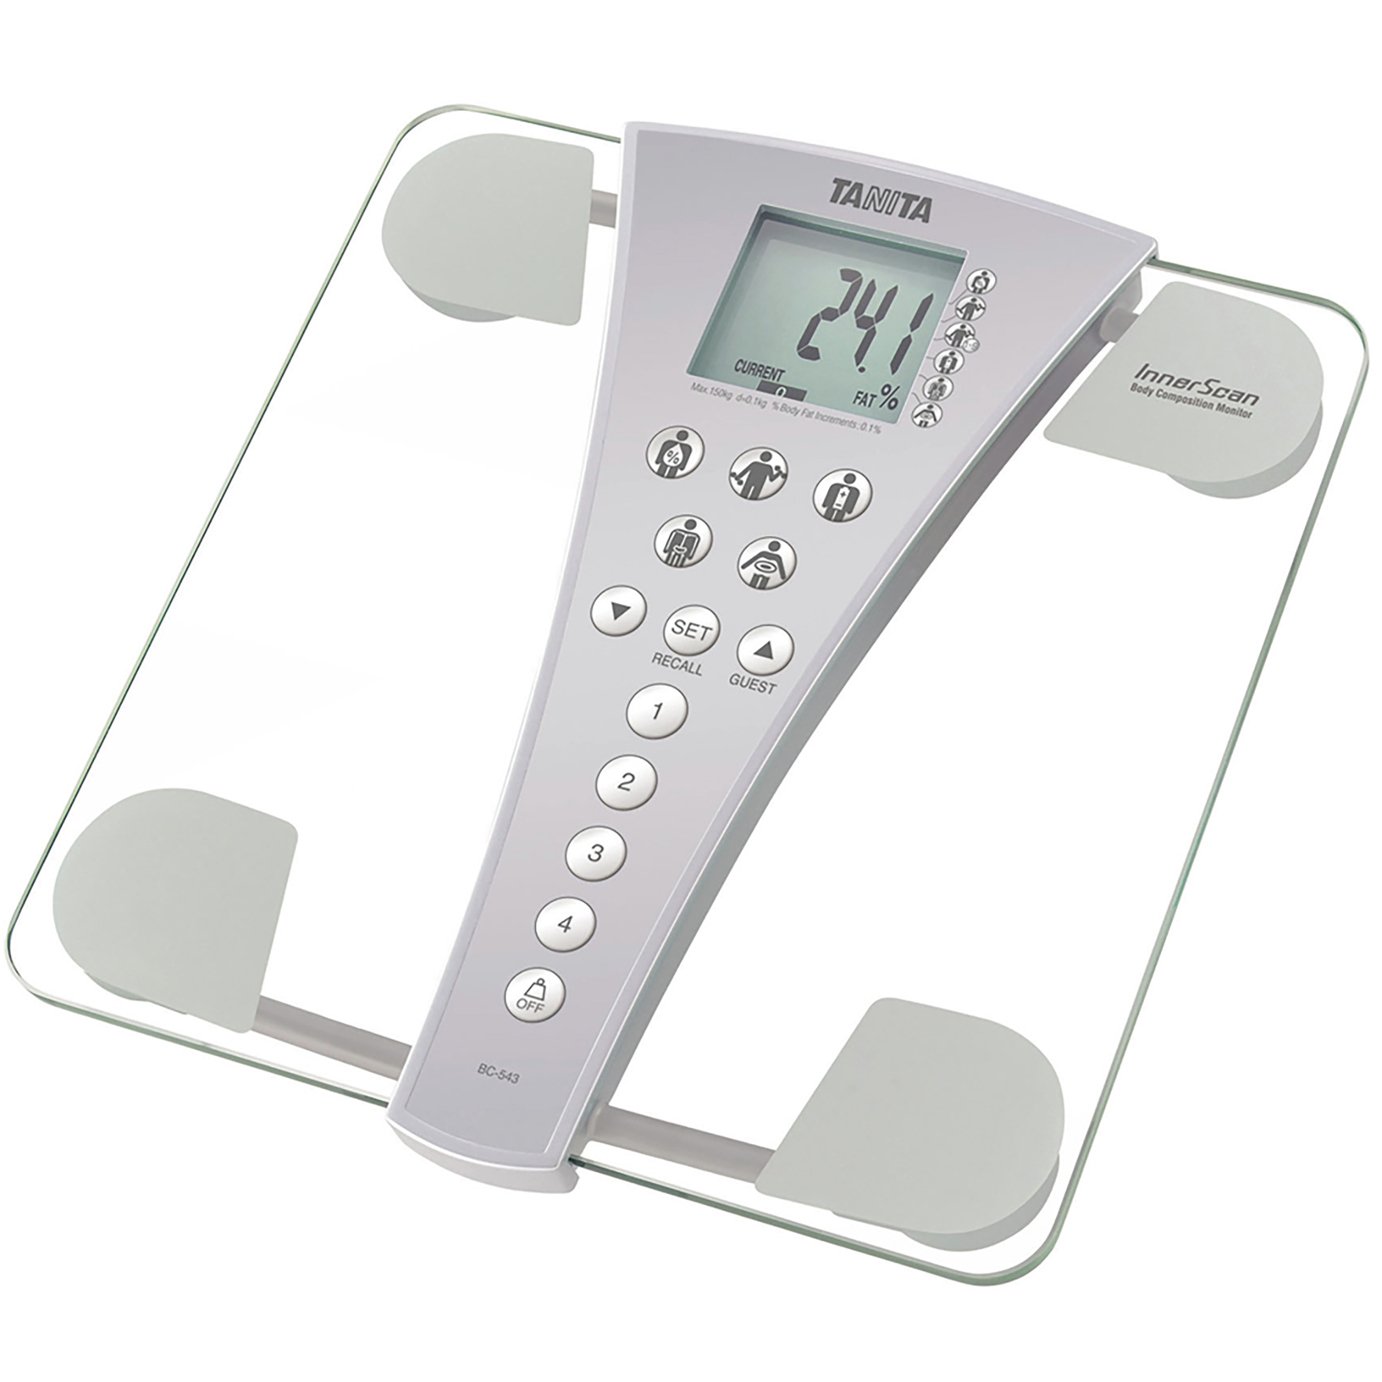 Tanita BC543 Innerscan Body Composition Scales Review